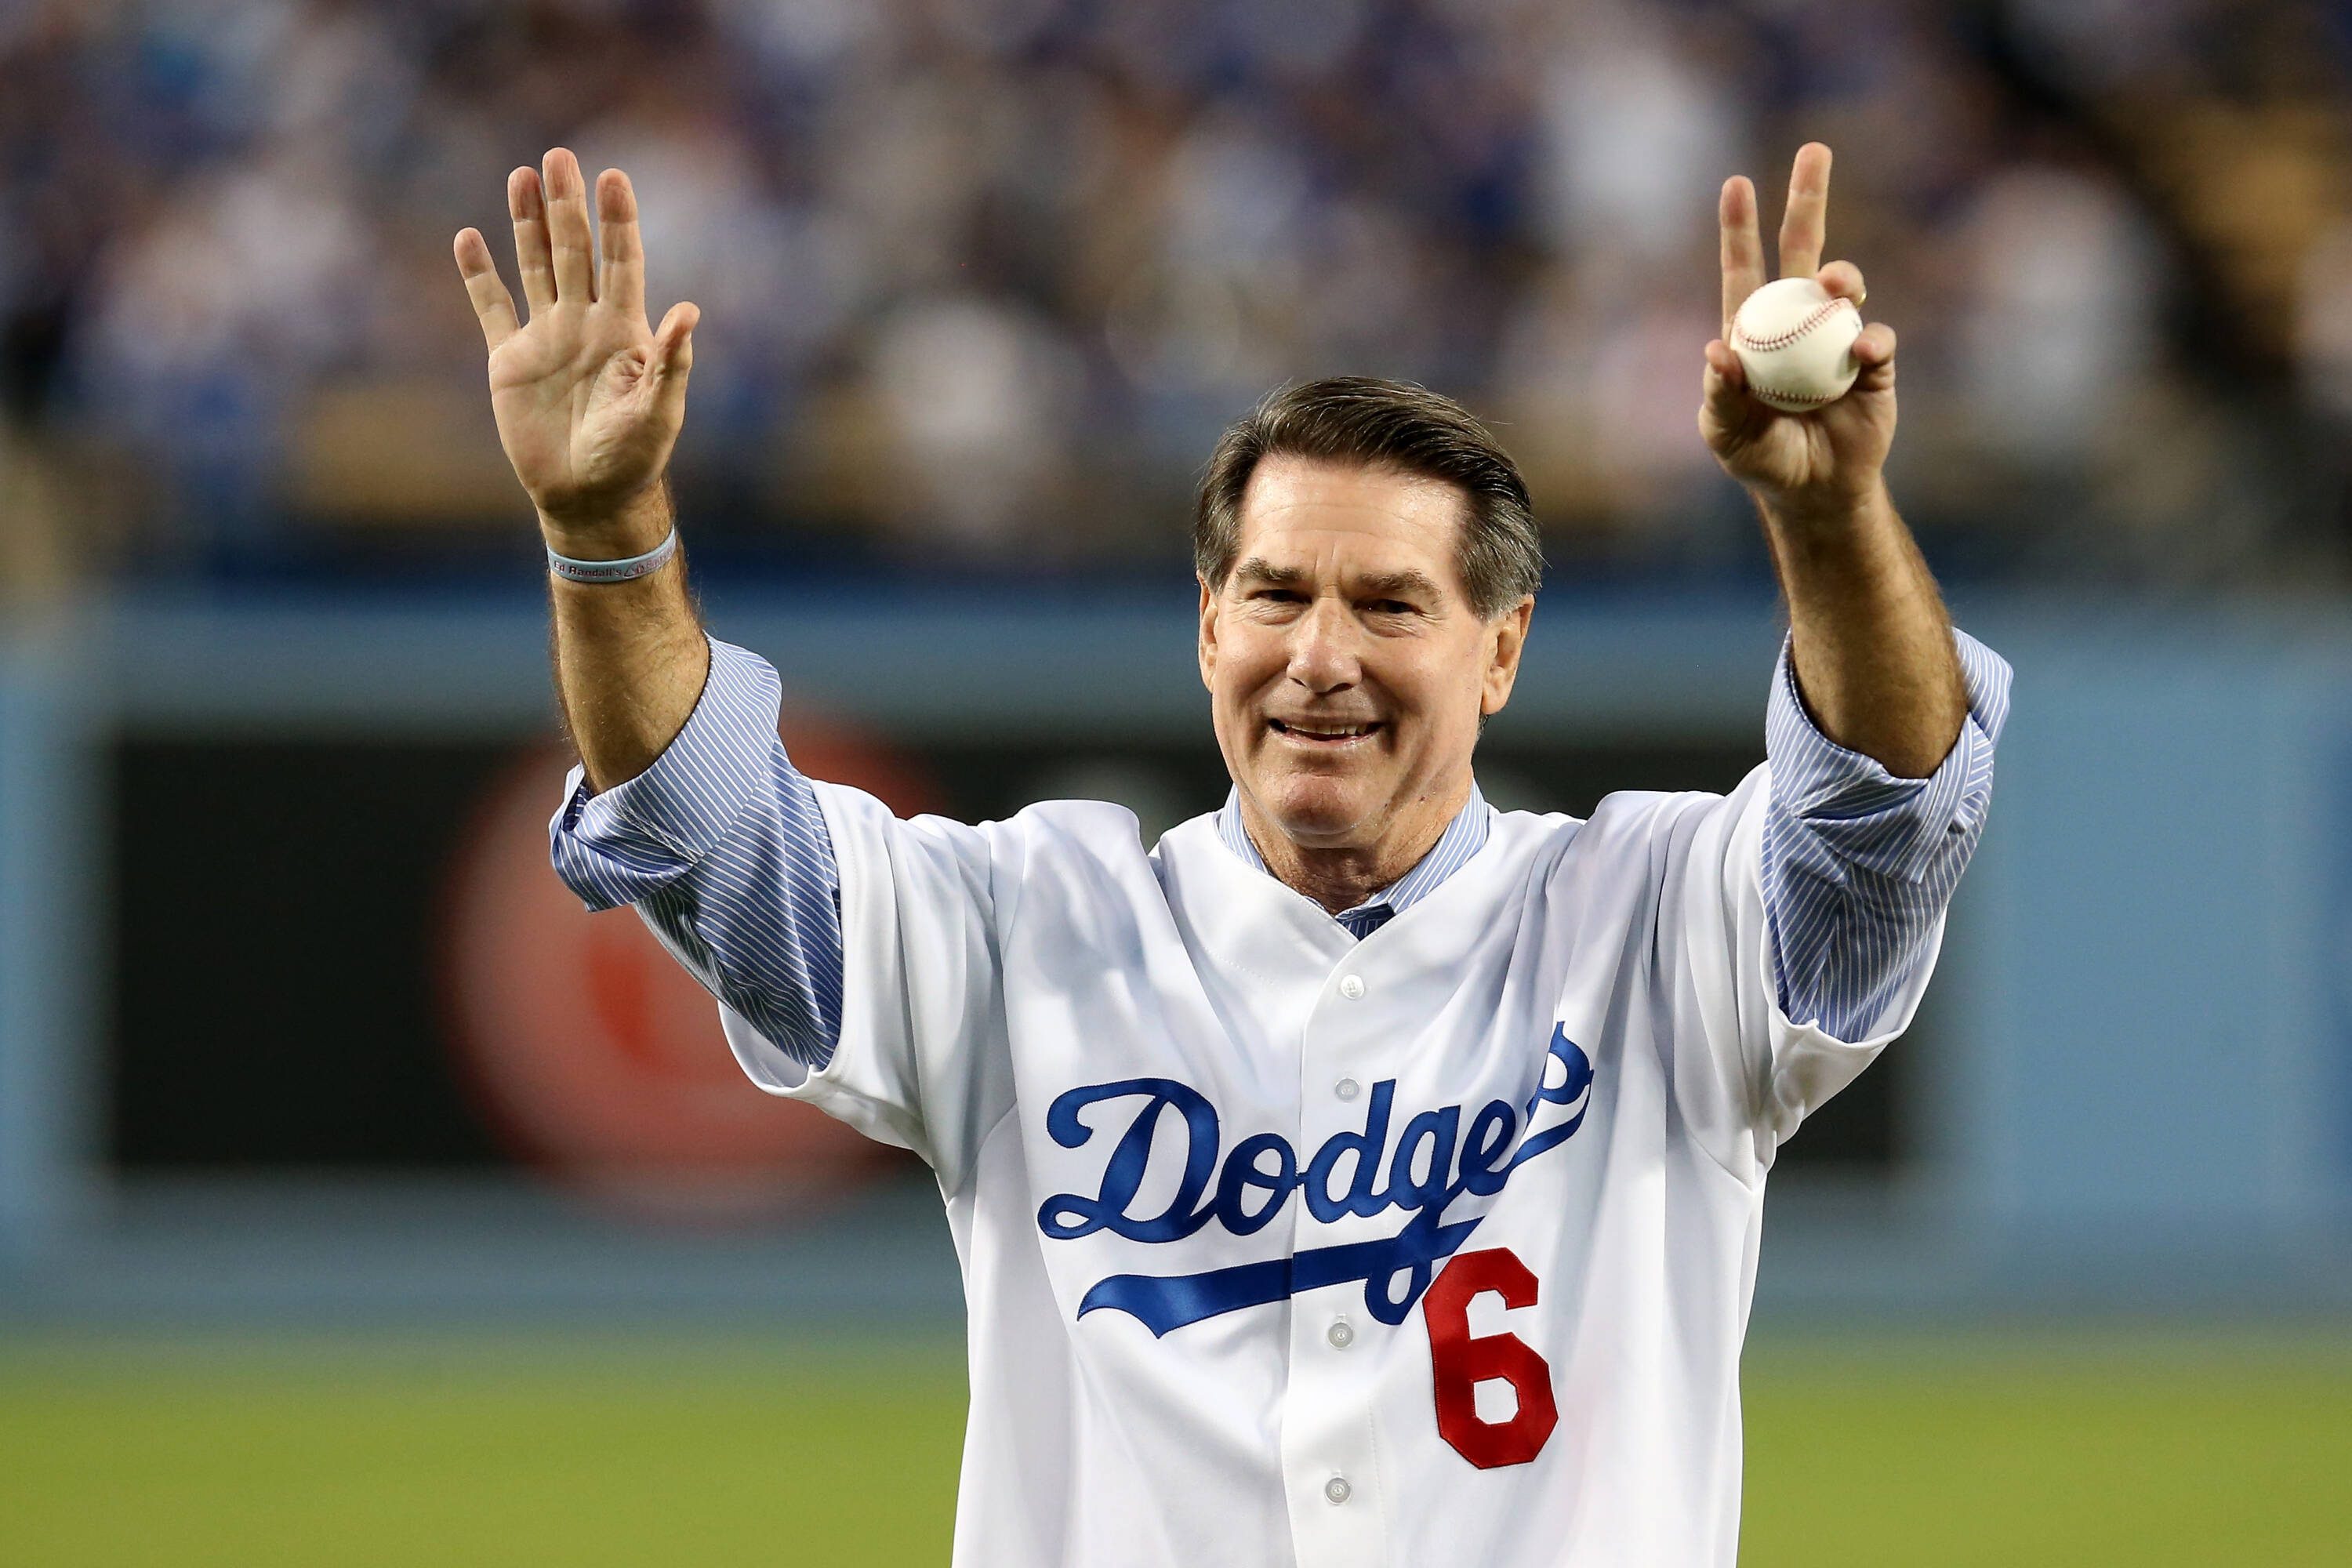 Dodgers: Fans Strongly Support Steve Garvey Getting Into the Hall of Fame